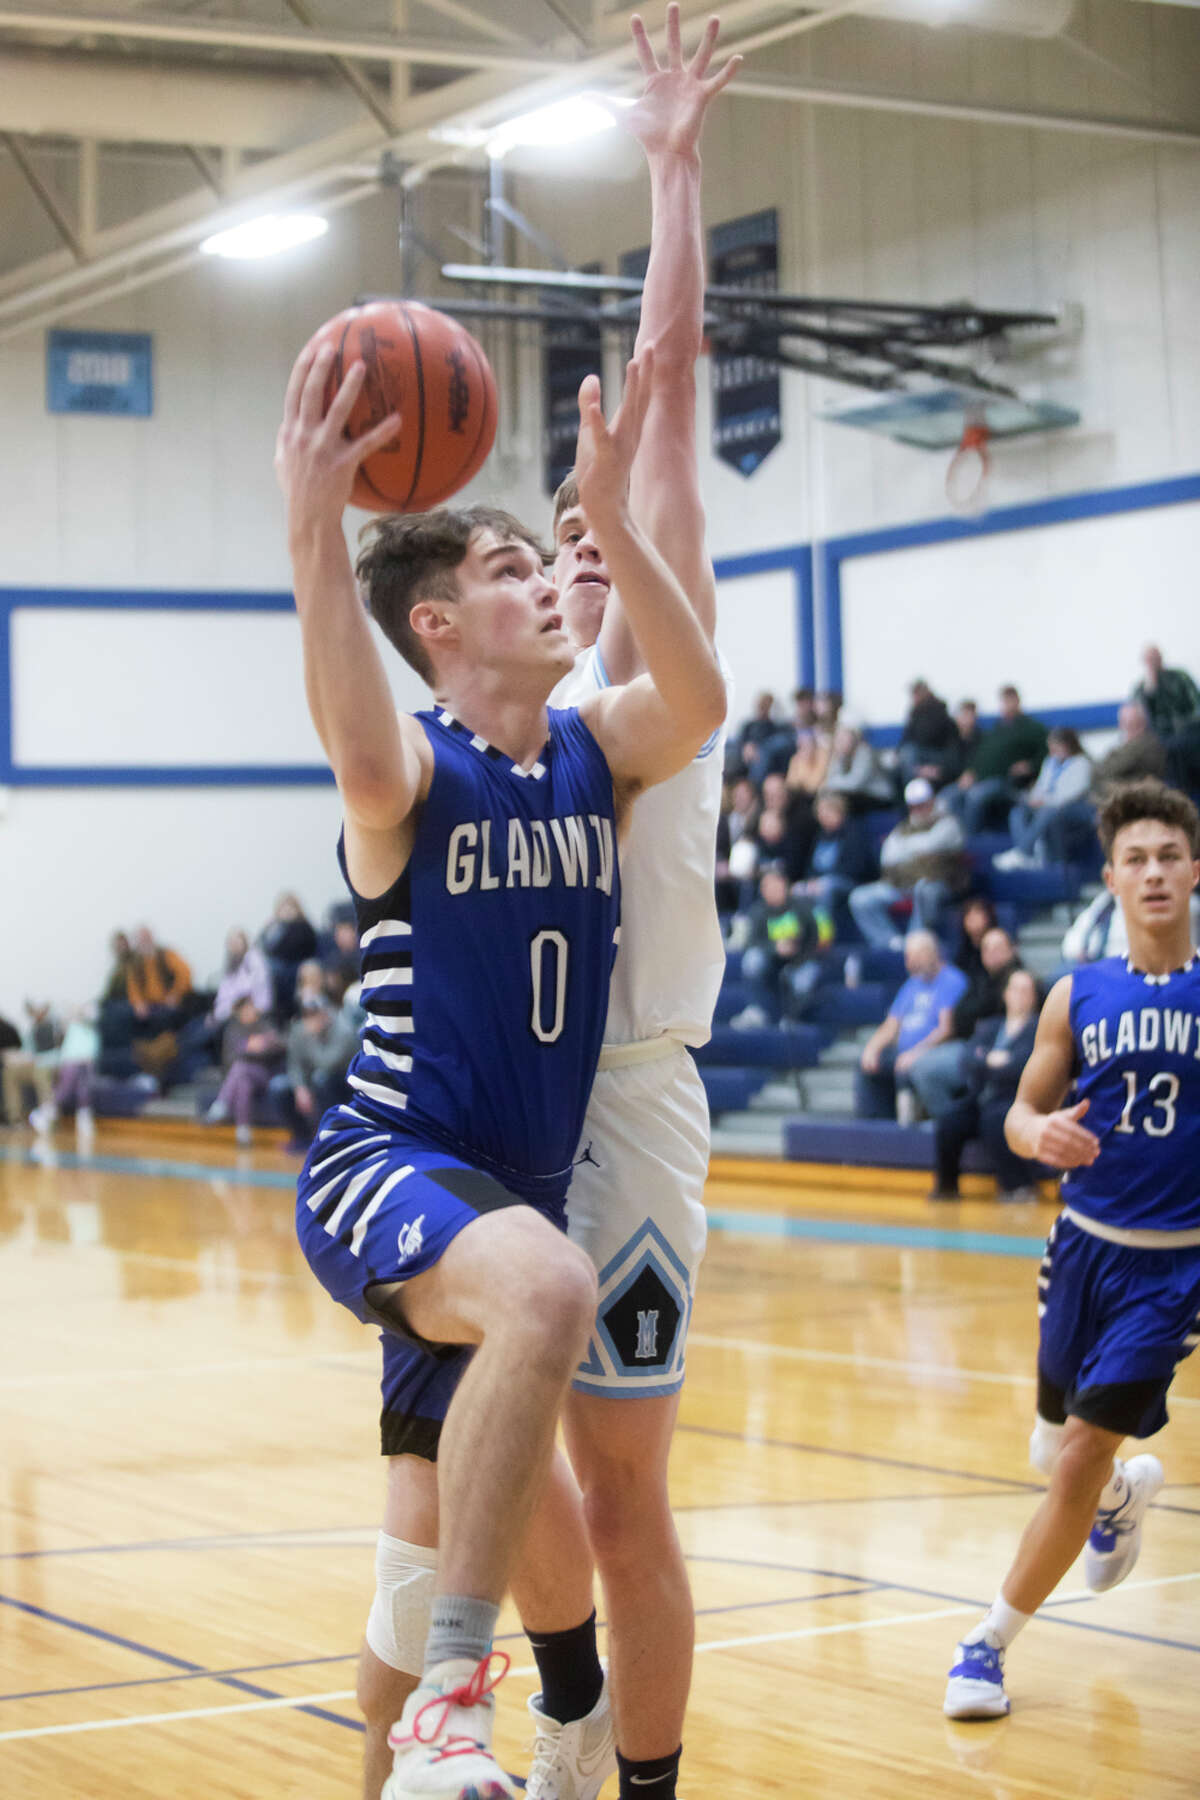 Gladwin's Denver Peters takes a shot while Meridian's Sawyer Moloy guards him during their game Tuesday, Jan. 11, 2022 at Meridian Early College High School.